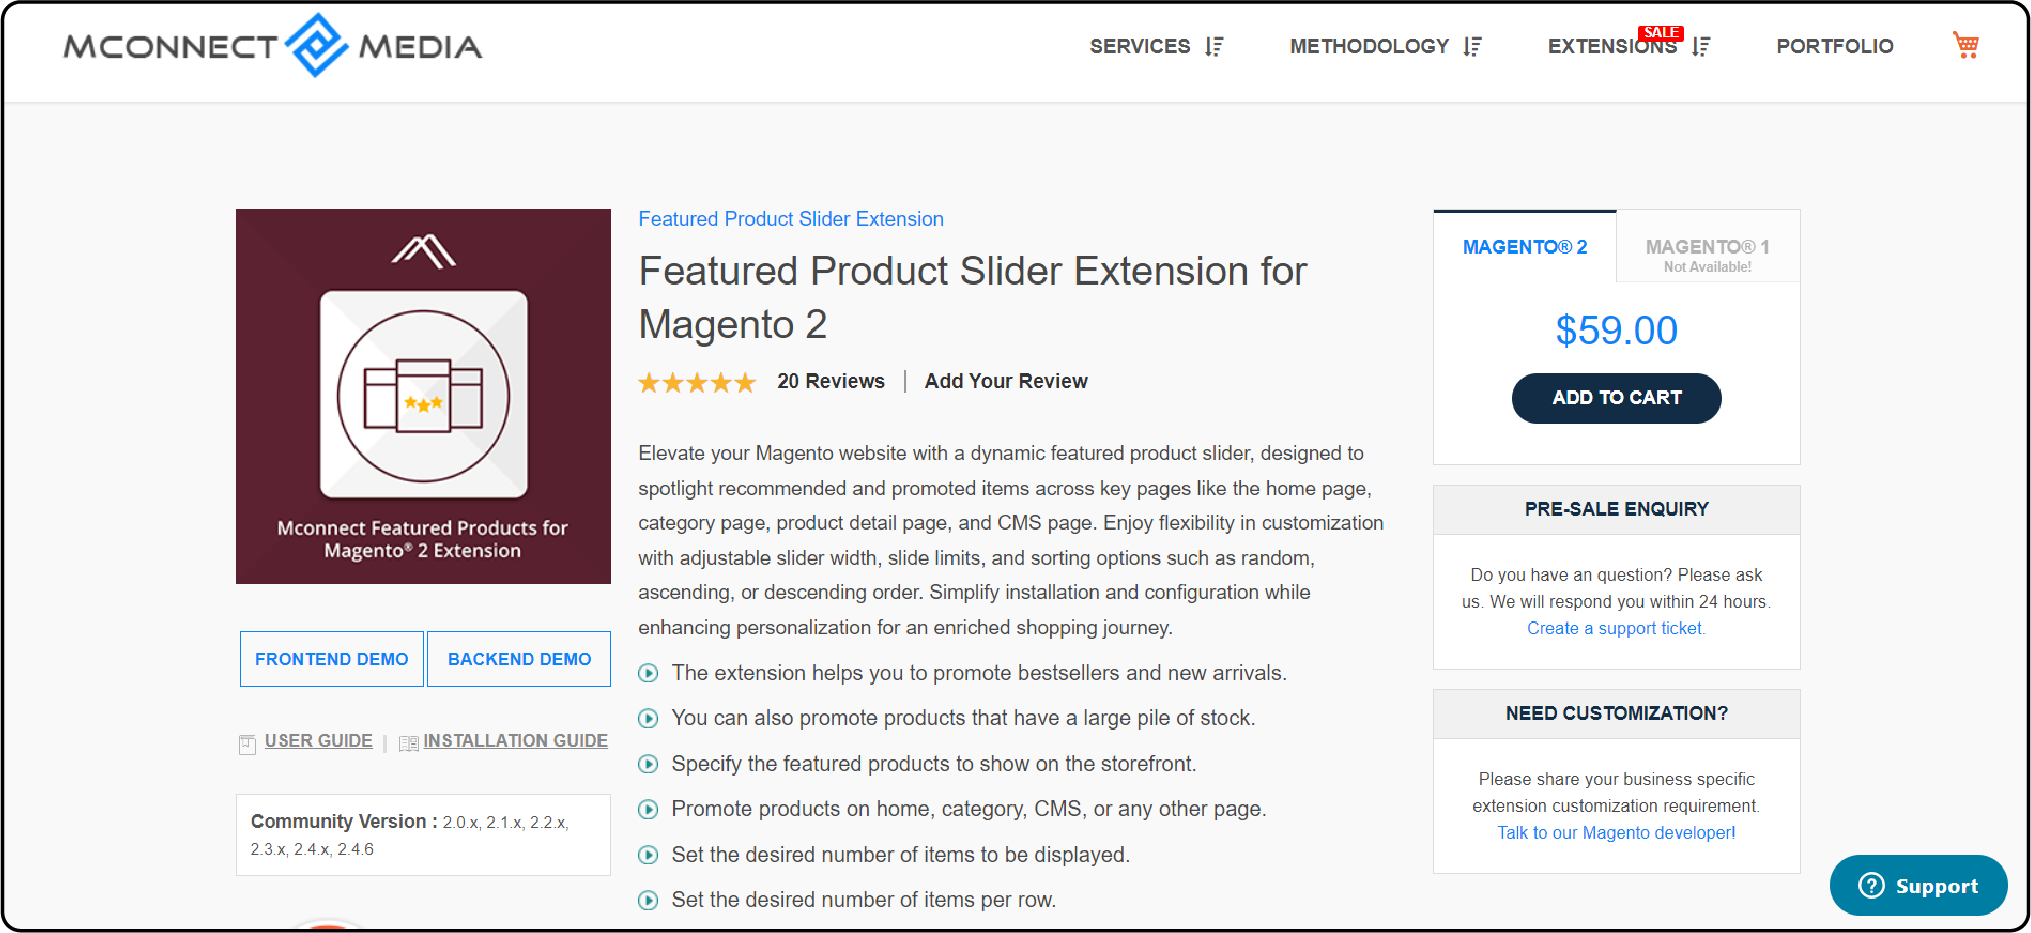 Magento 2 Featured Product Slider Extension by M- Connect Media